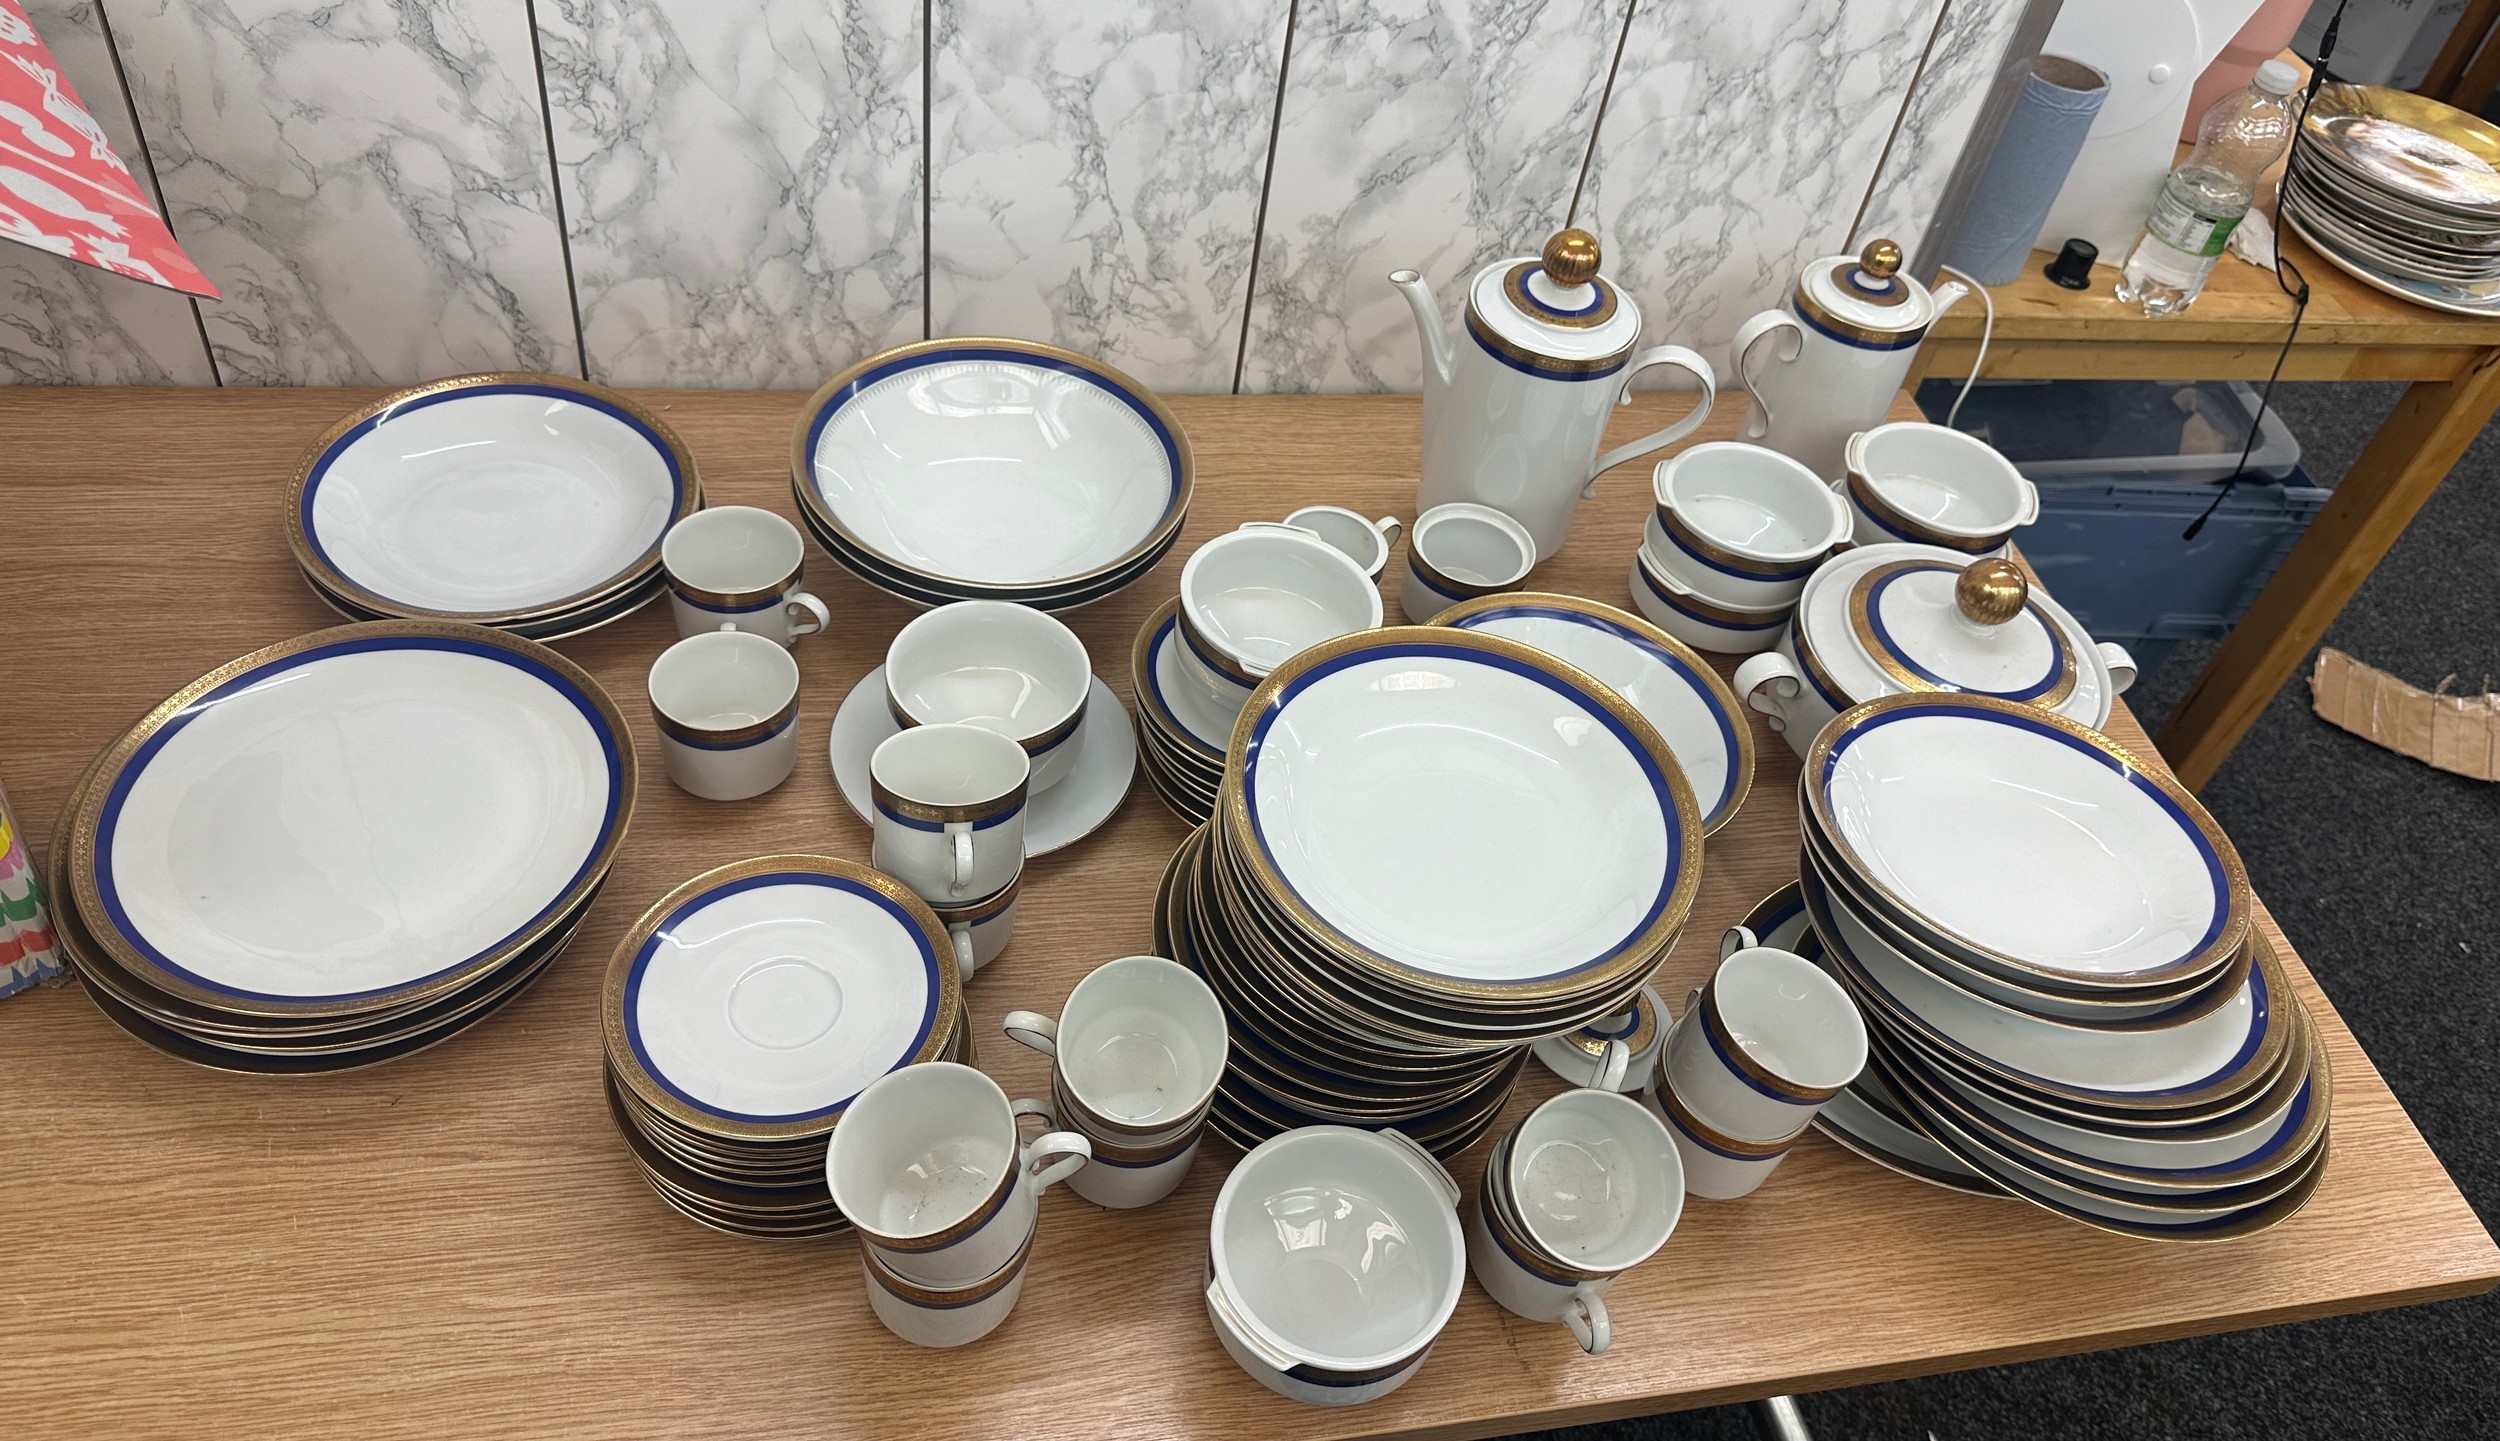 Large selection of Winterling part dinner service - Image 2 of 5